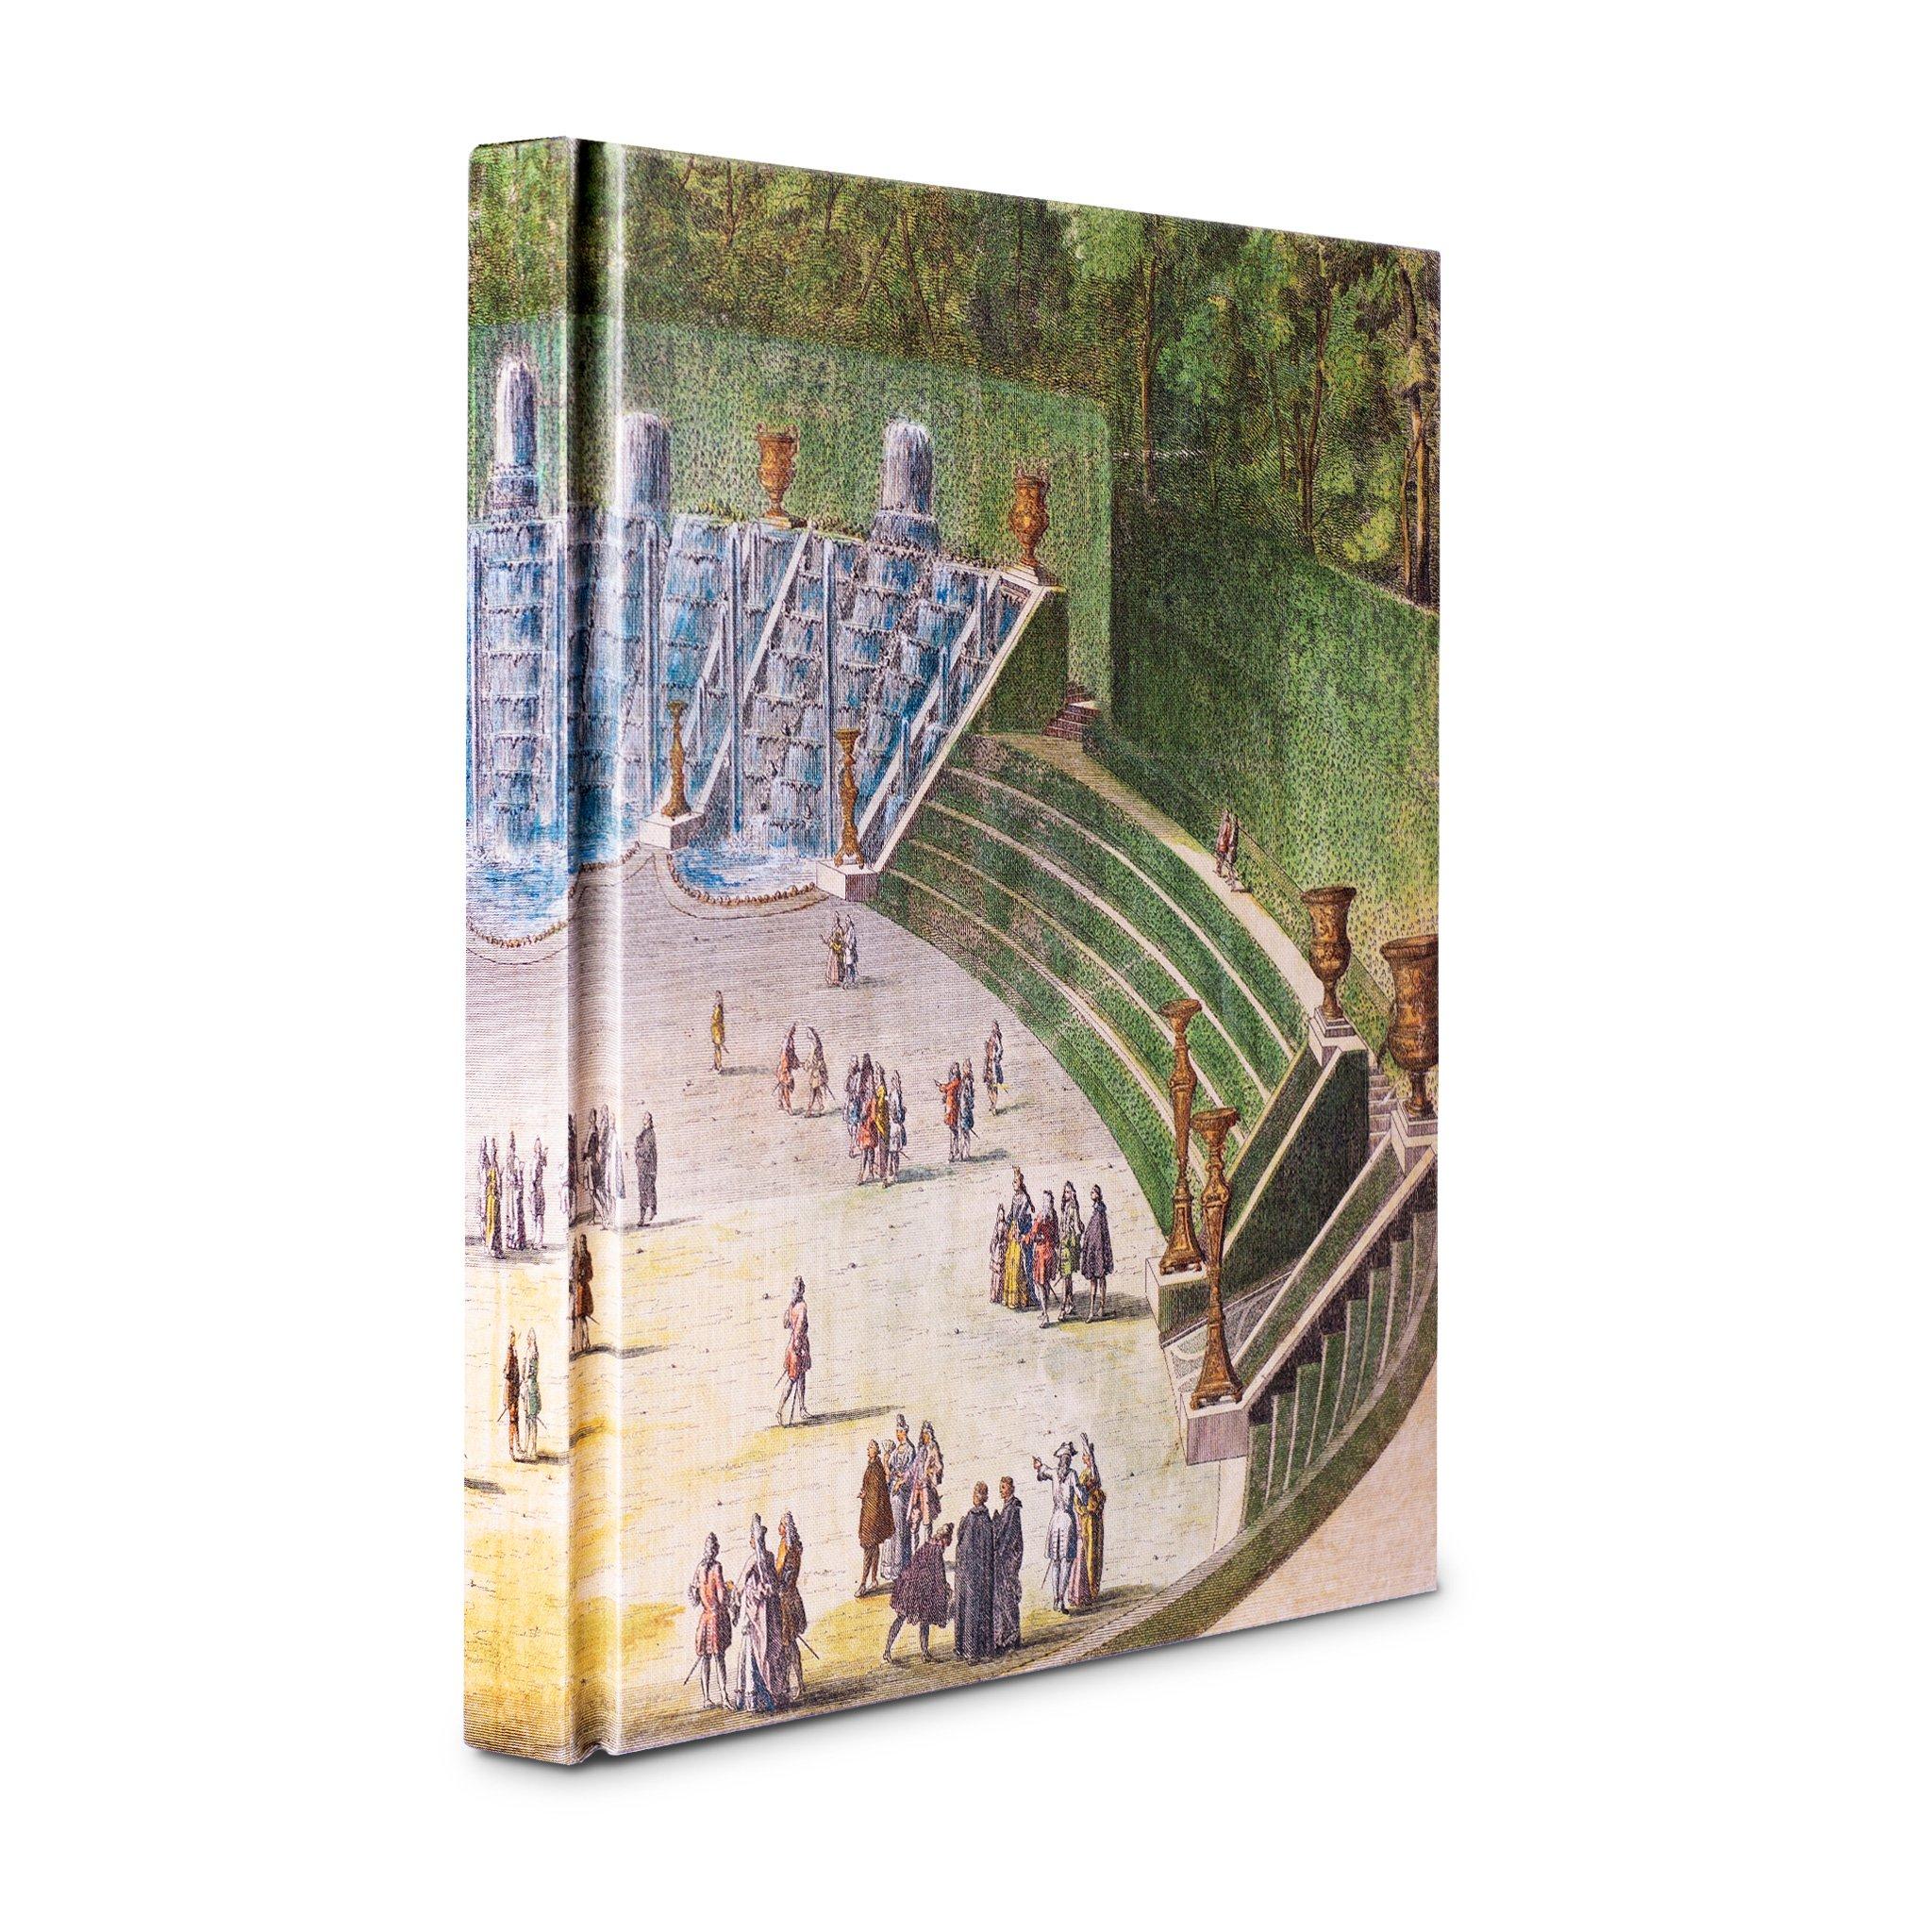 Italian Versailles From Louis XIV to Jeff Koons (Special Edition)